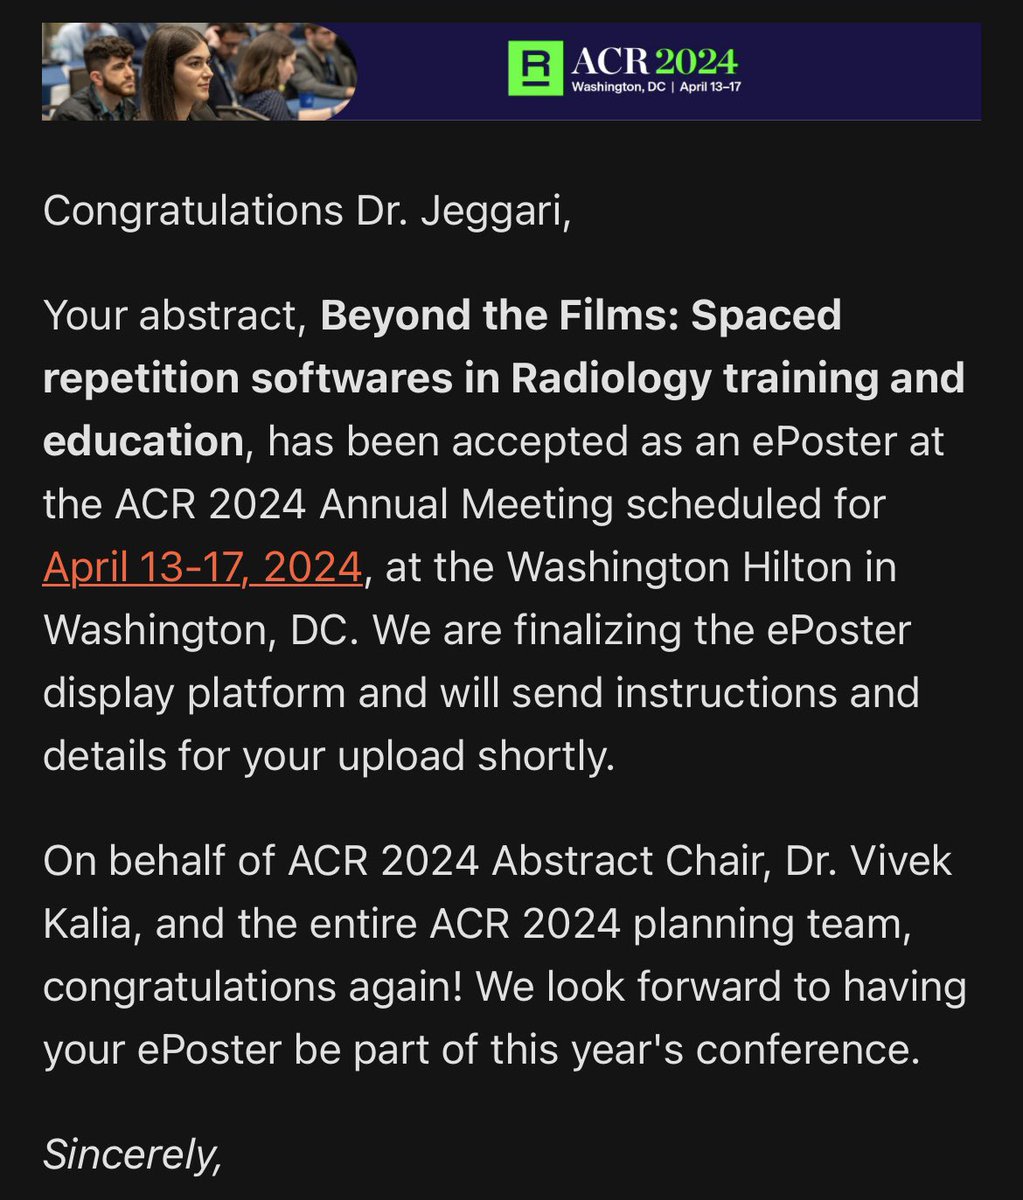 Delighted to share that two of my abstracts have been accepted for poster presentation at the @RadiologyACR 2024 annual meeting. Grateful for the opportunity!